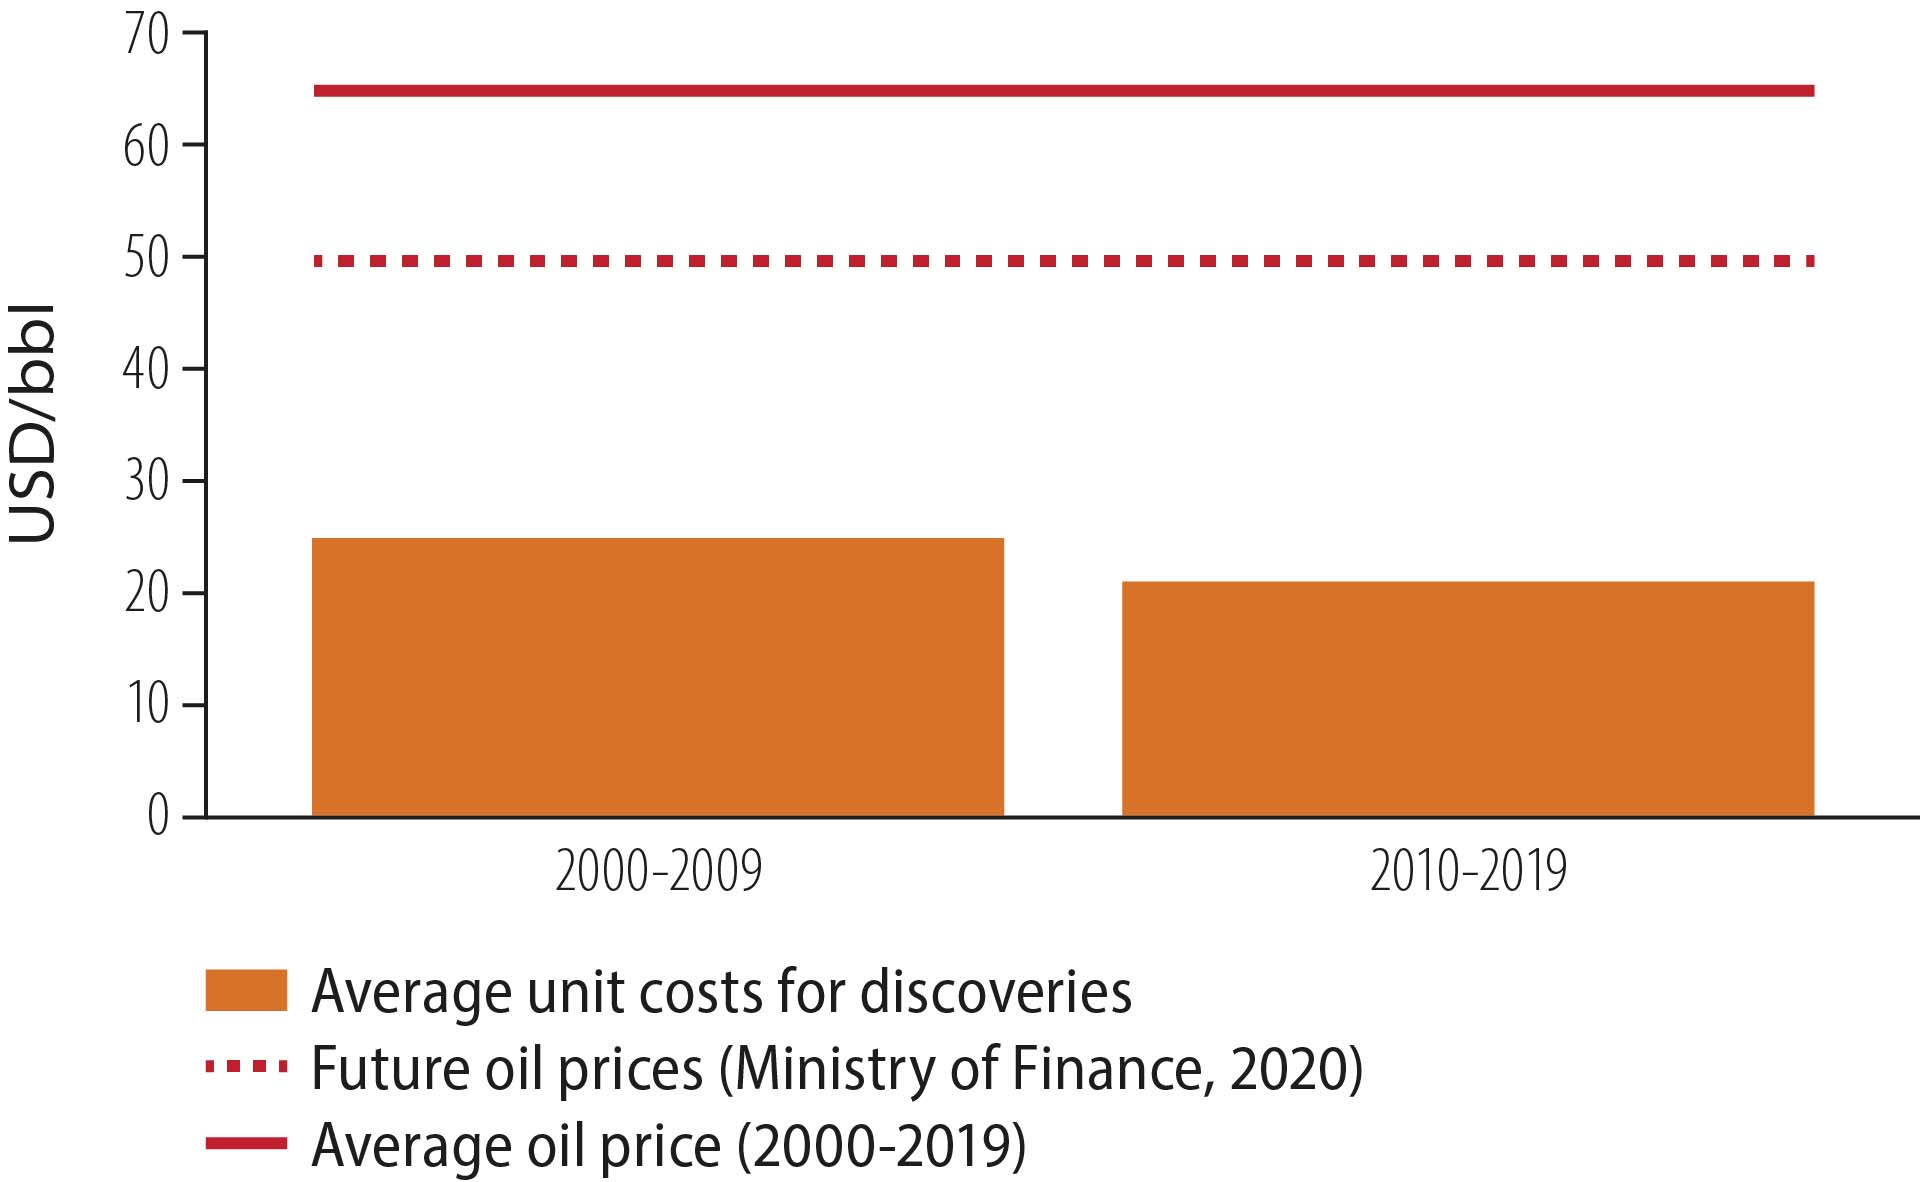 Figure 4.19 Average unit costs for discoveries and oil prices